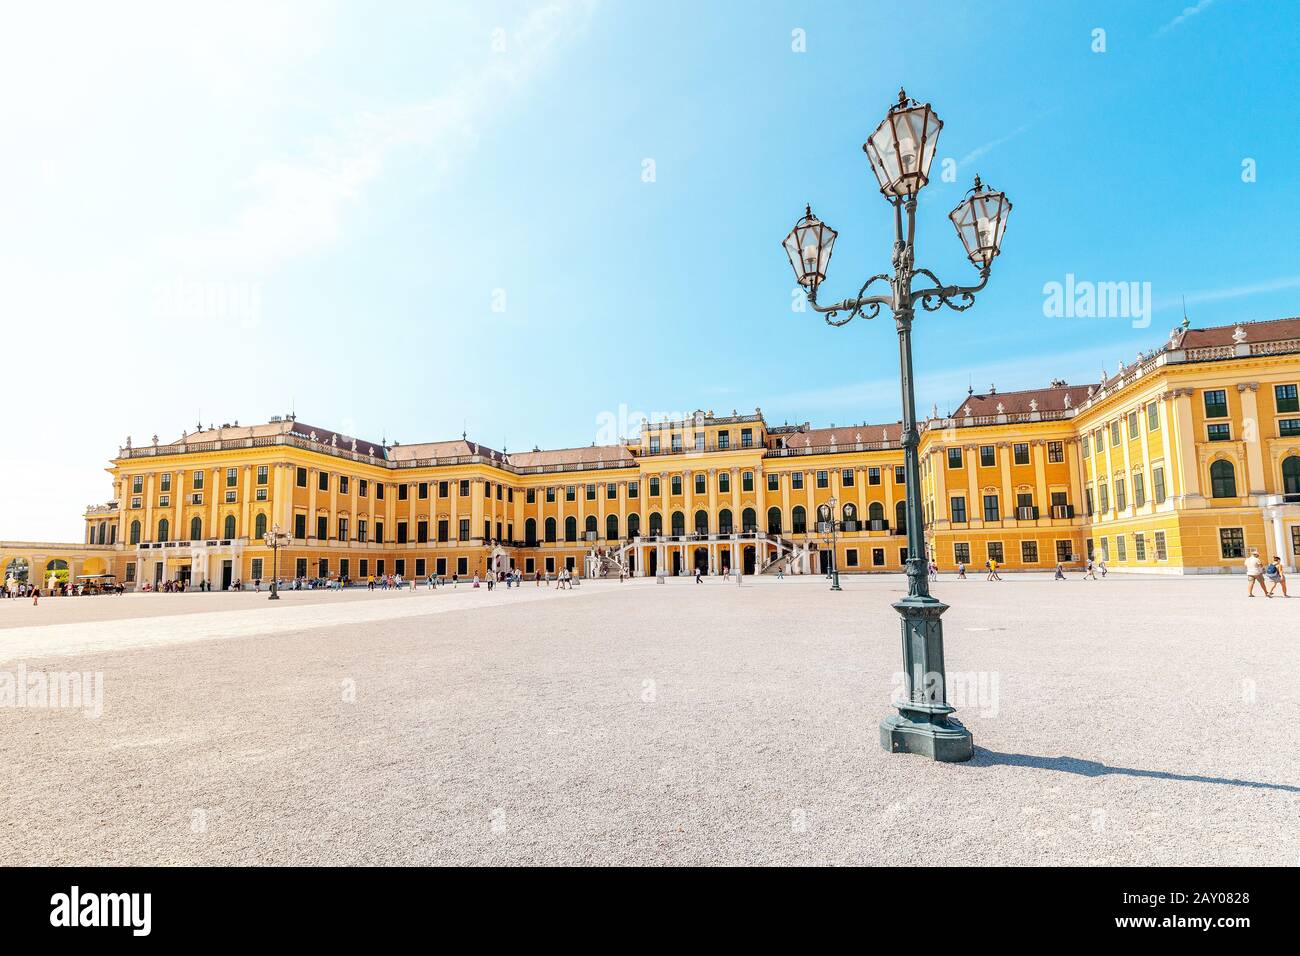 19 July 2019, Vienna, Austria: Panoramic view of a Famous Schonbrunn Palace in Vienna. Travel in Europe and Austria concept Stock Photo